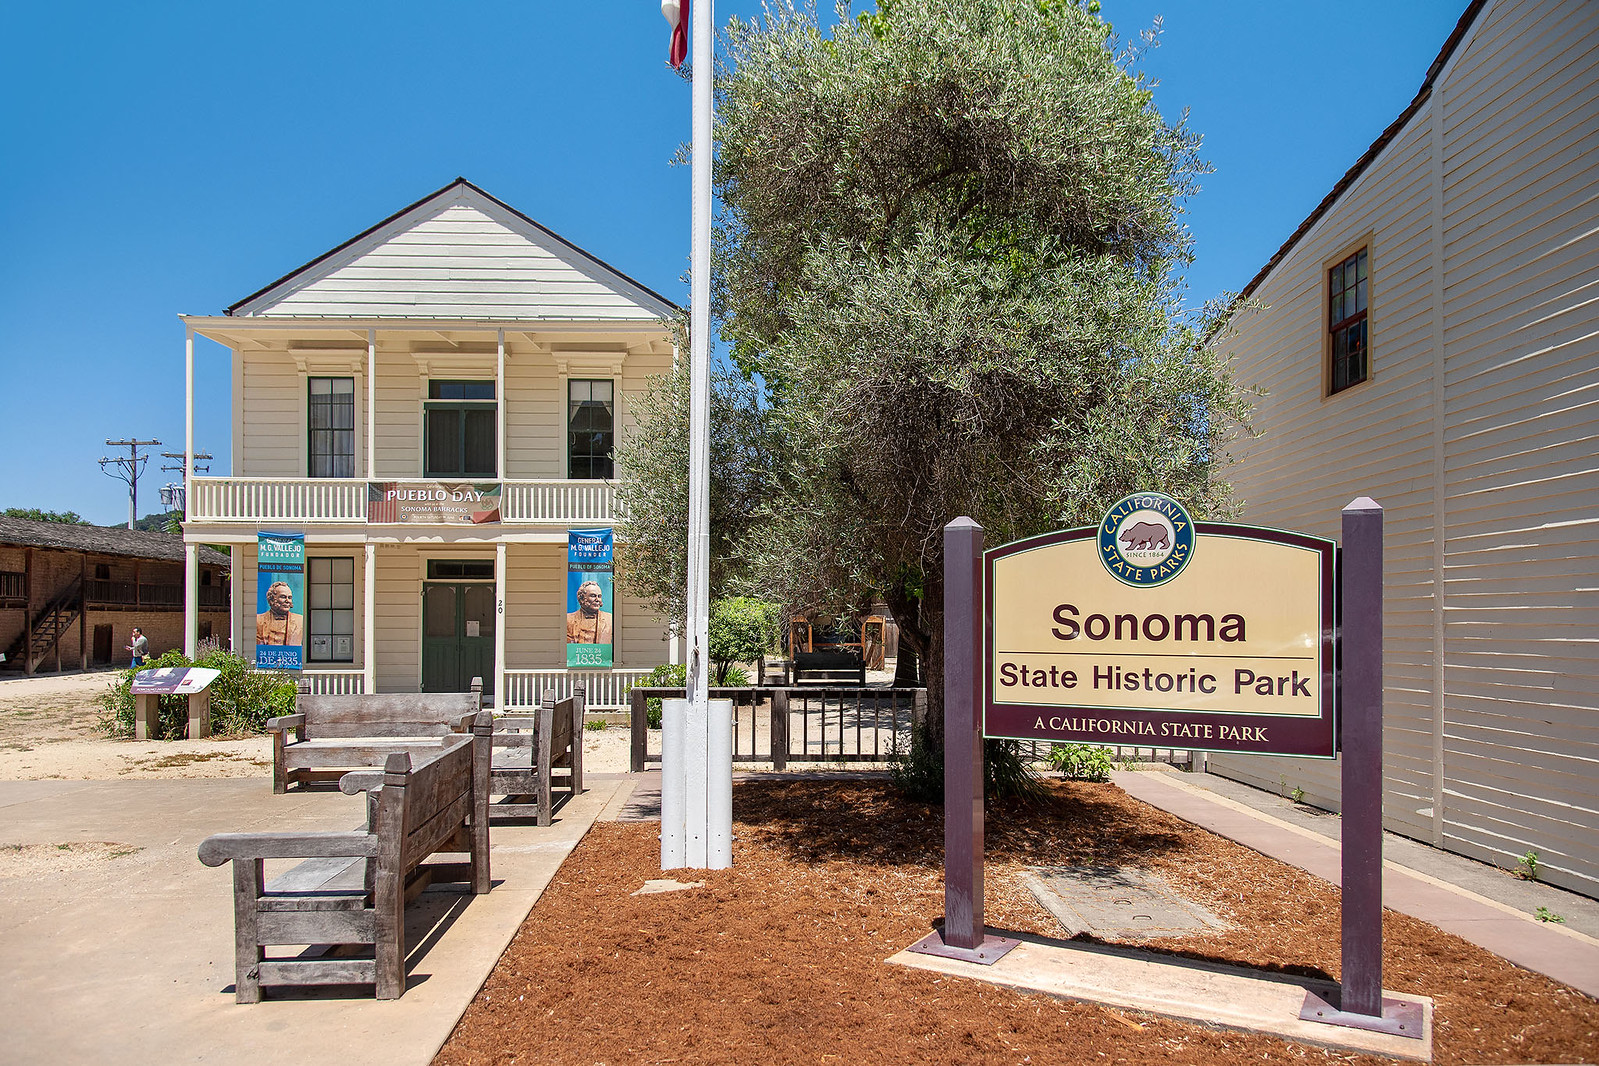 Cover Image for 795 Center Street, Sonoma presented by Daniel Casabonne